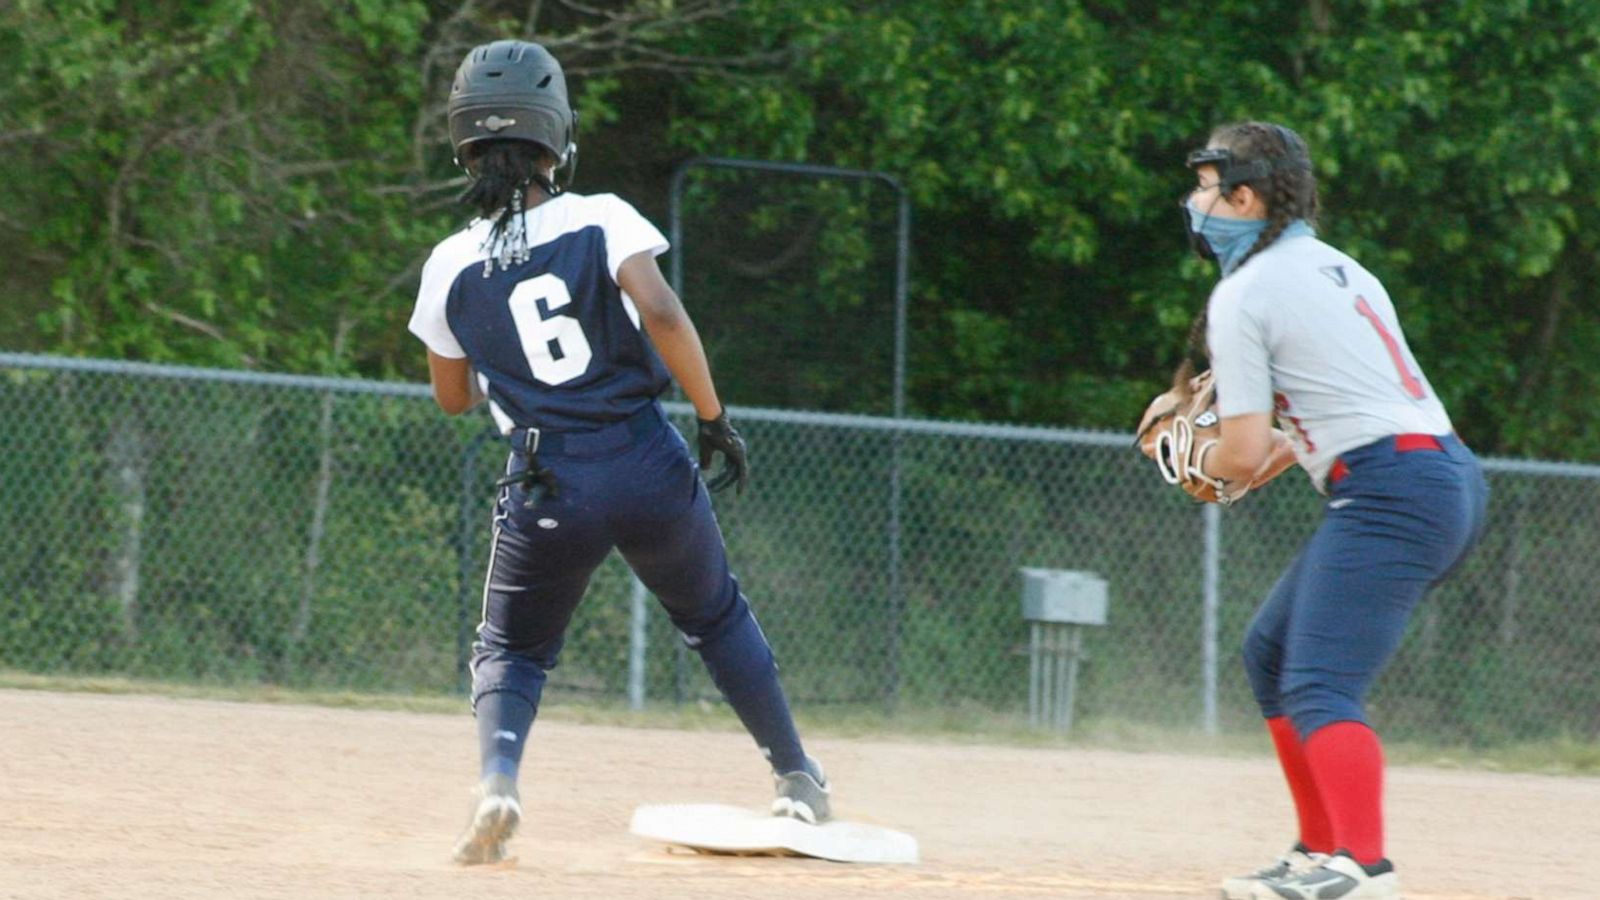 PHOTO: Hillside High School student, Nicole Pyles (seen on the left), plays in a softball game on April 19 with her beaded knotless braids tied in a ponytail in Durham, N.C.